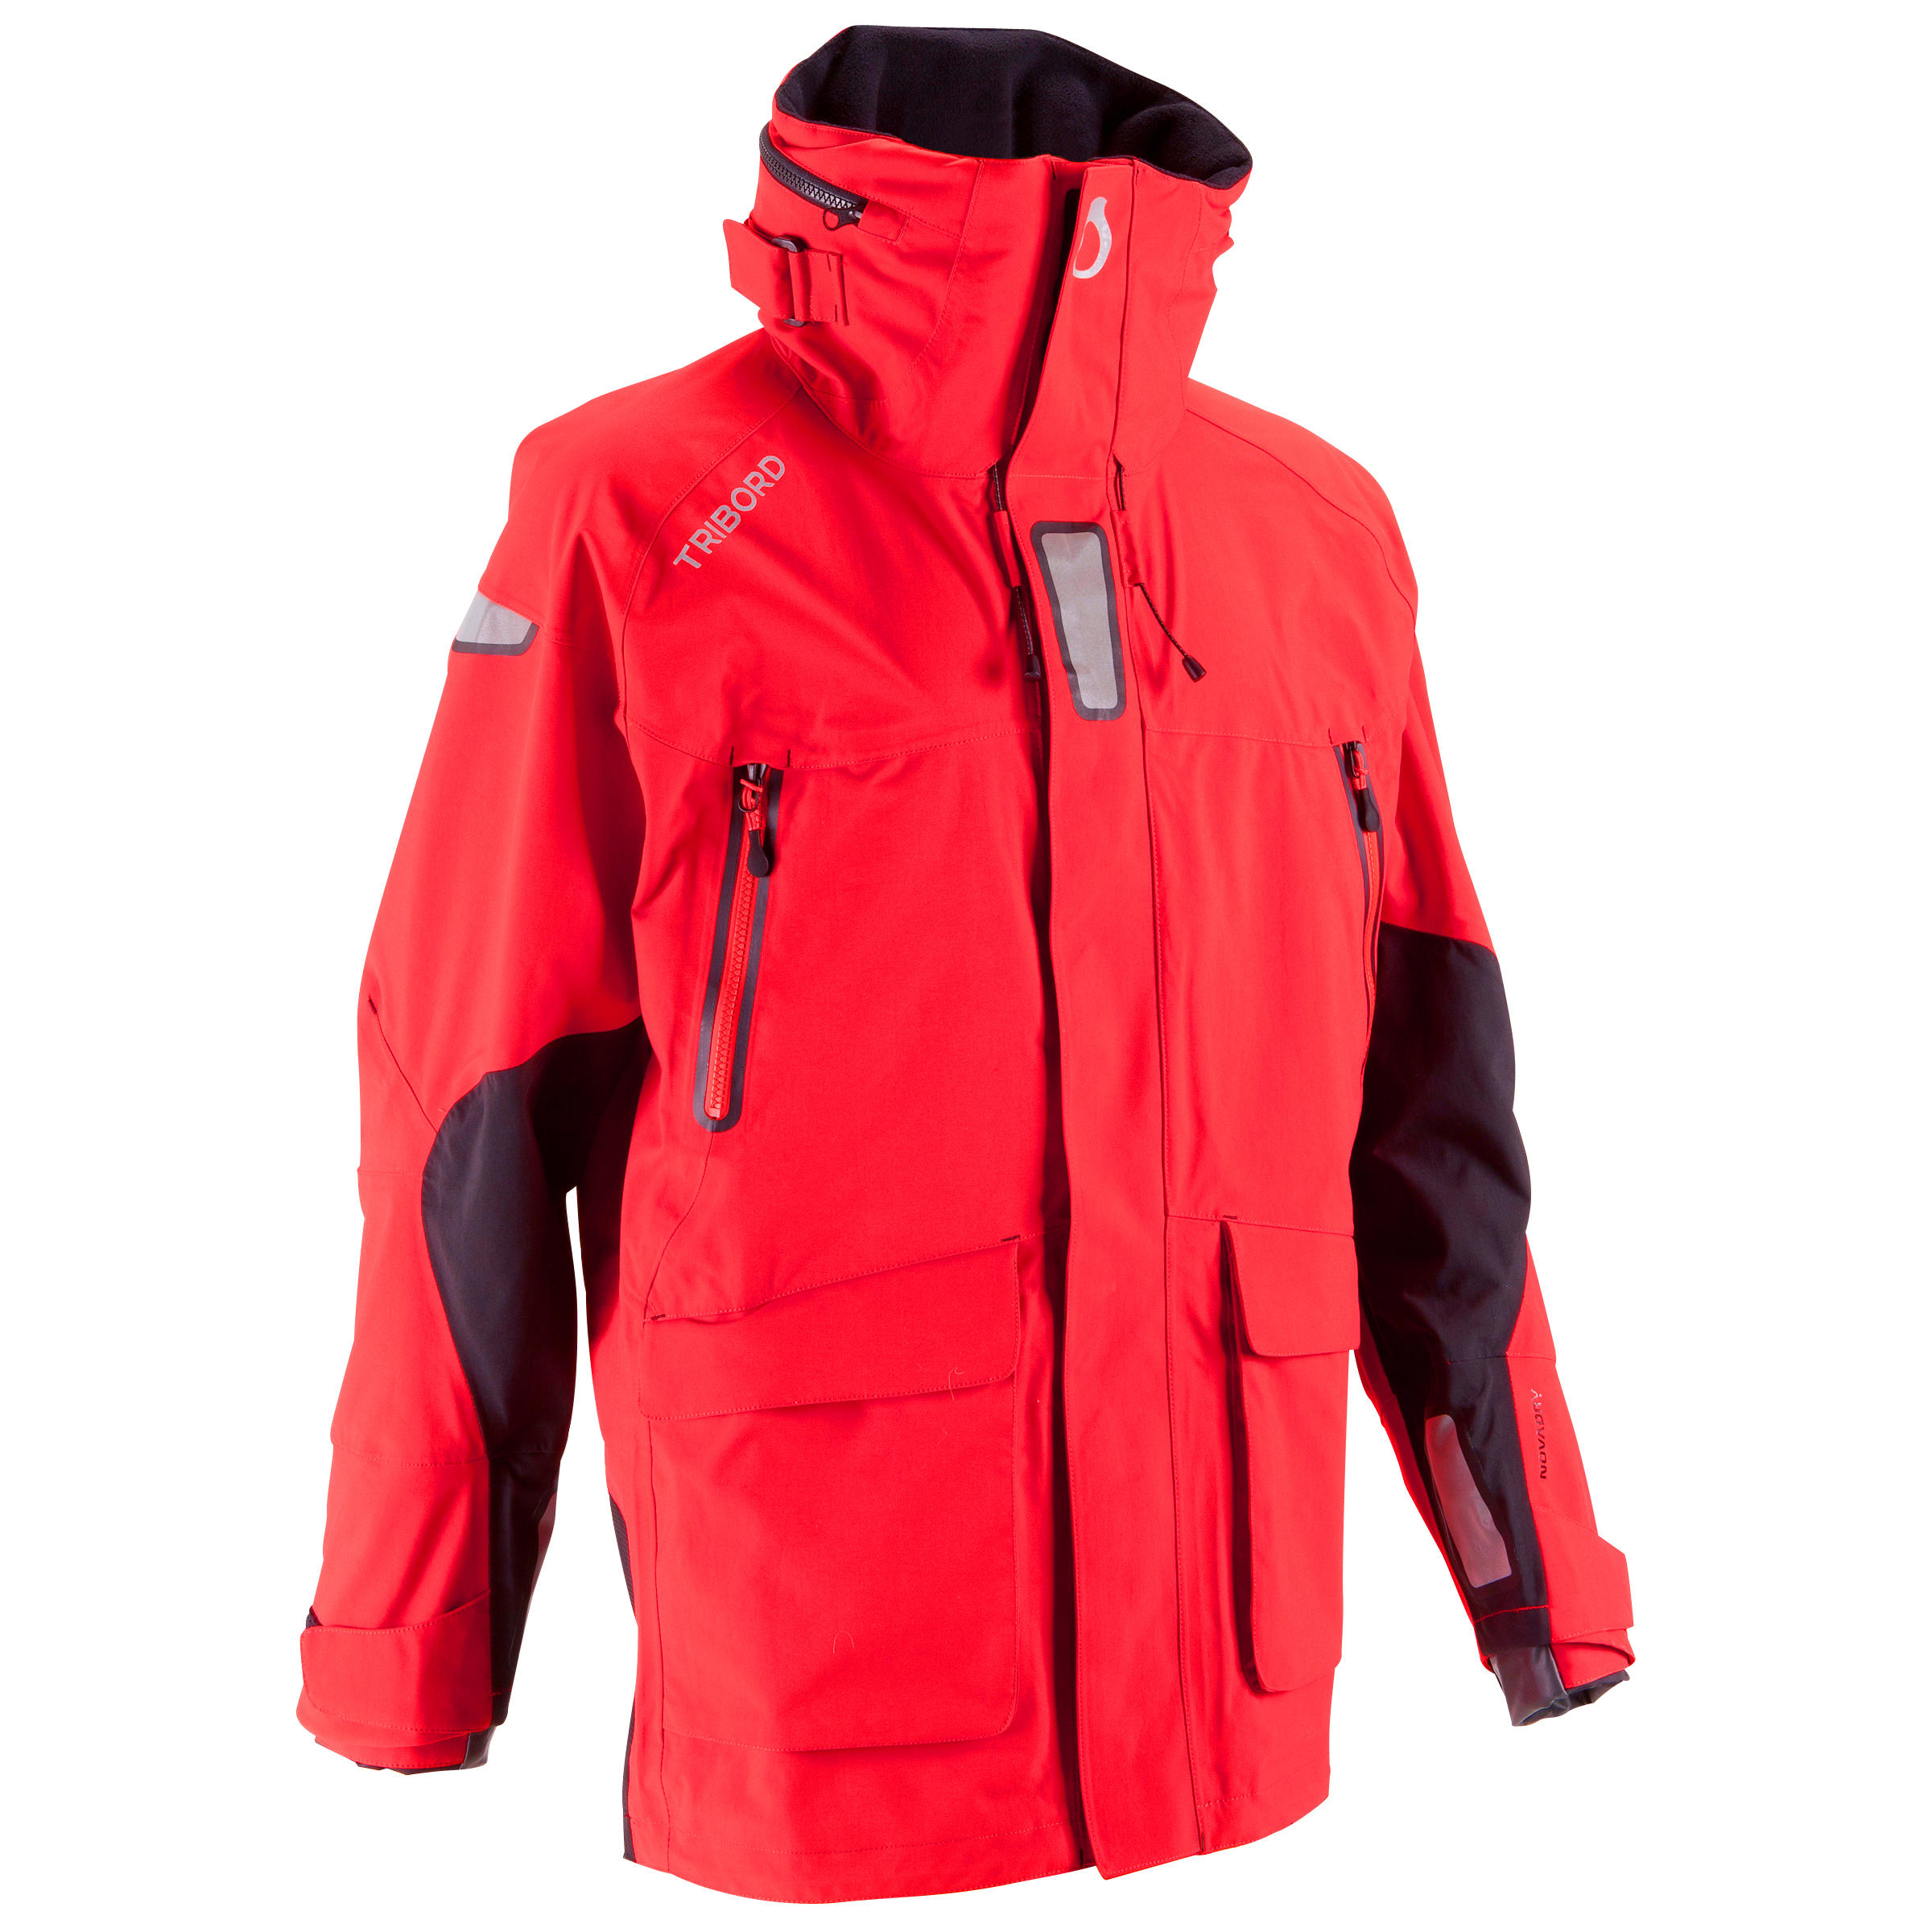 TRIBORD Ozean 900 Men's Waterproof and Breathable Sailing Jacket - Red